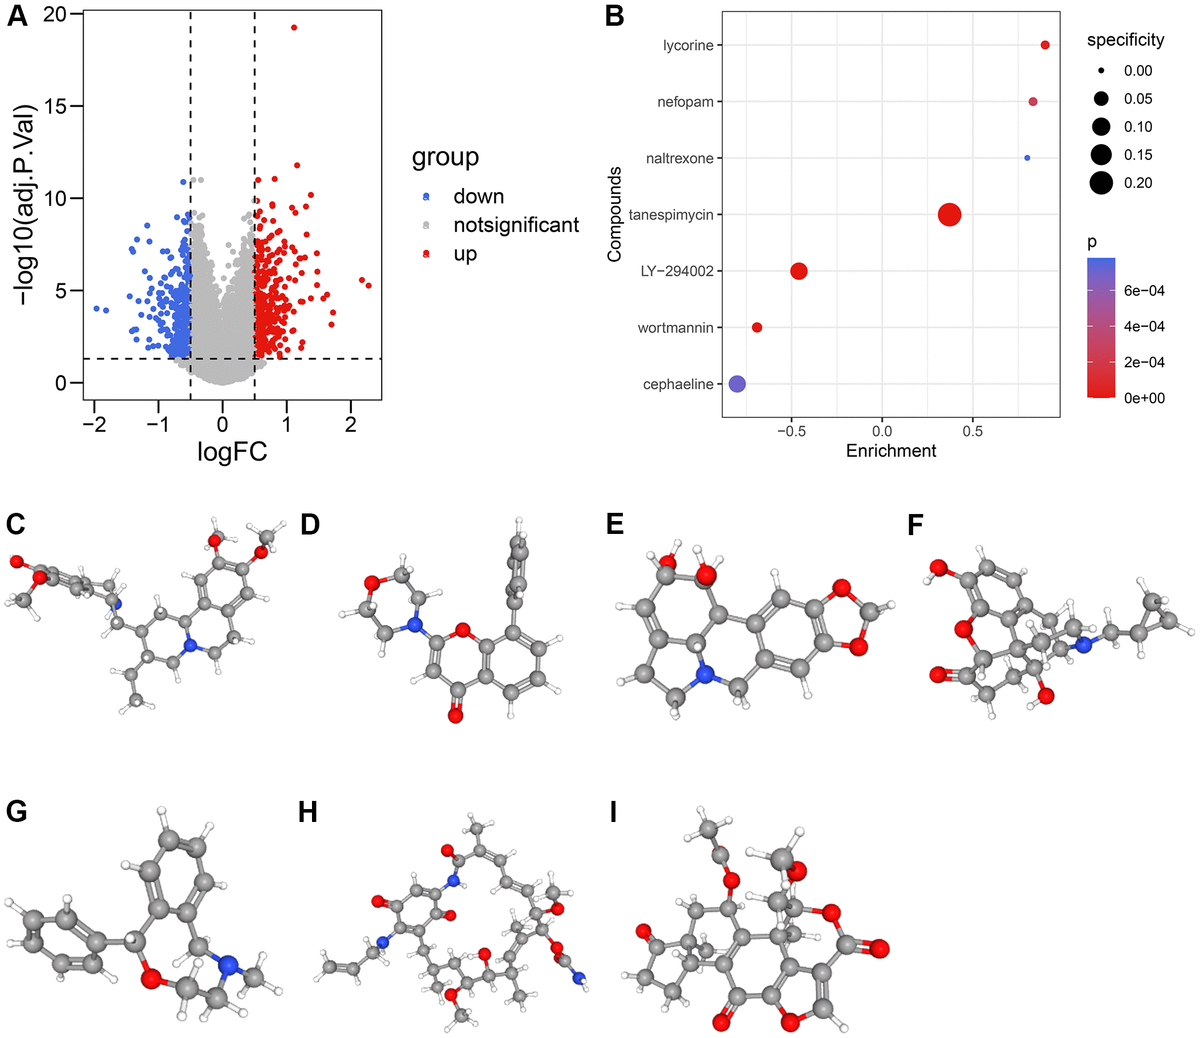 The candidate compounds targeting HRS. (A) The volcano plot displayed the DEGs between low-HRS and high-HRS cases. (B–I) Seven compounds, including cephaeline (C), LY-294002 (D), lycorine (E), naltrexone (F), nefopam (G), tanespimycin (H), and wortmannin (I), were identified.